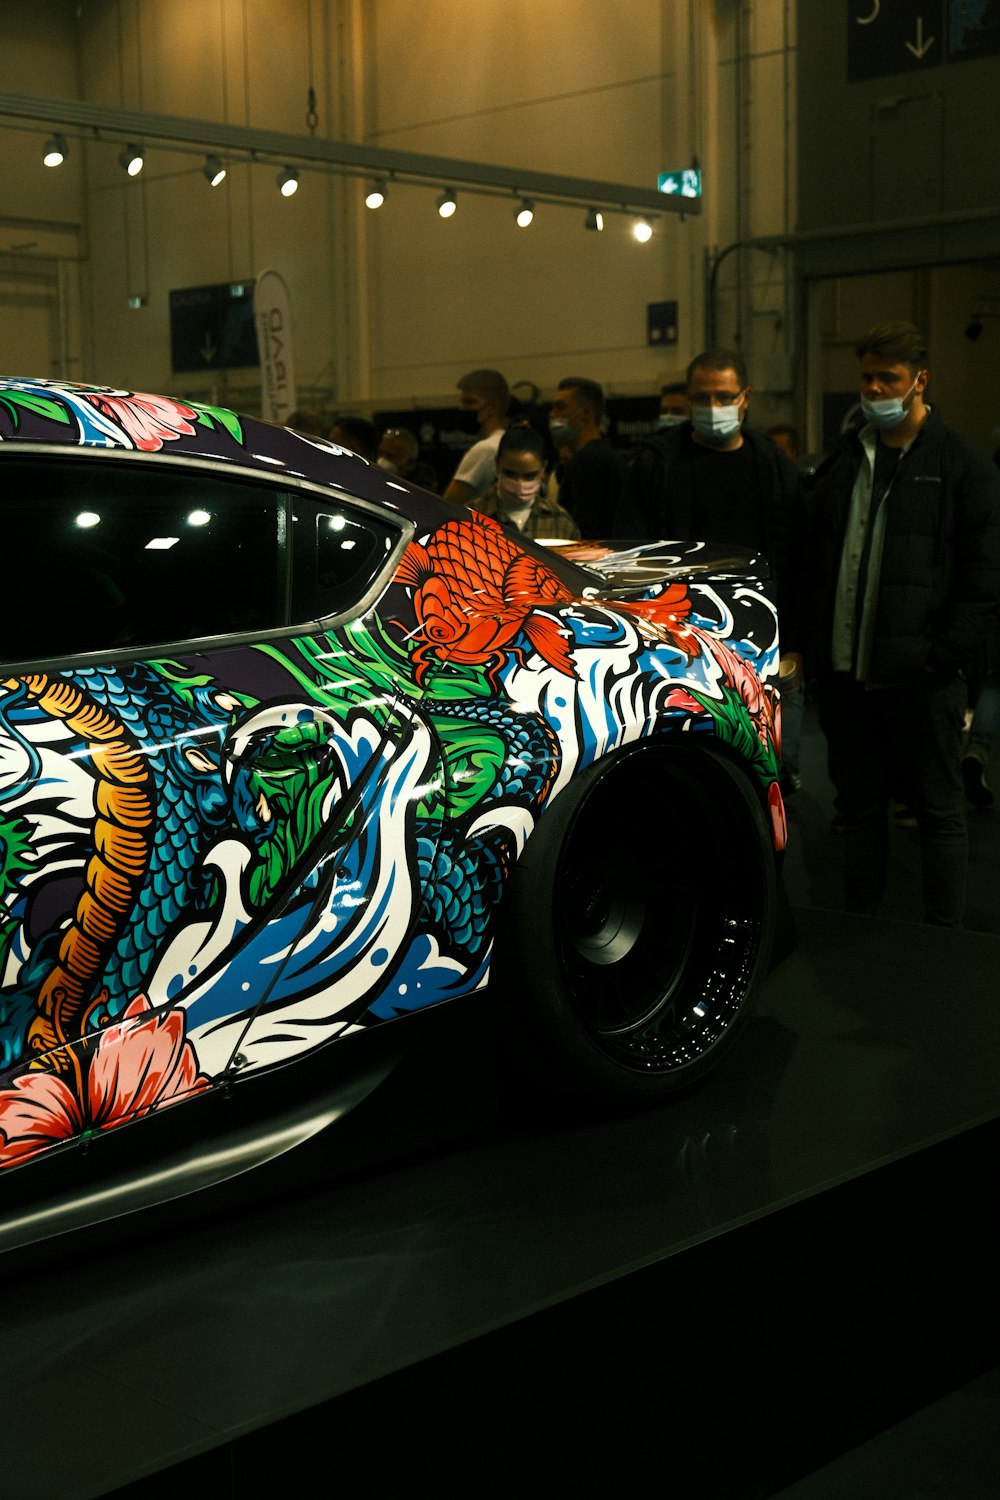 a car with a dragon painted on the side of it